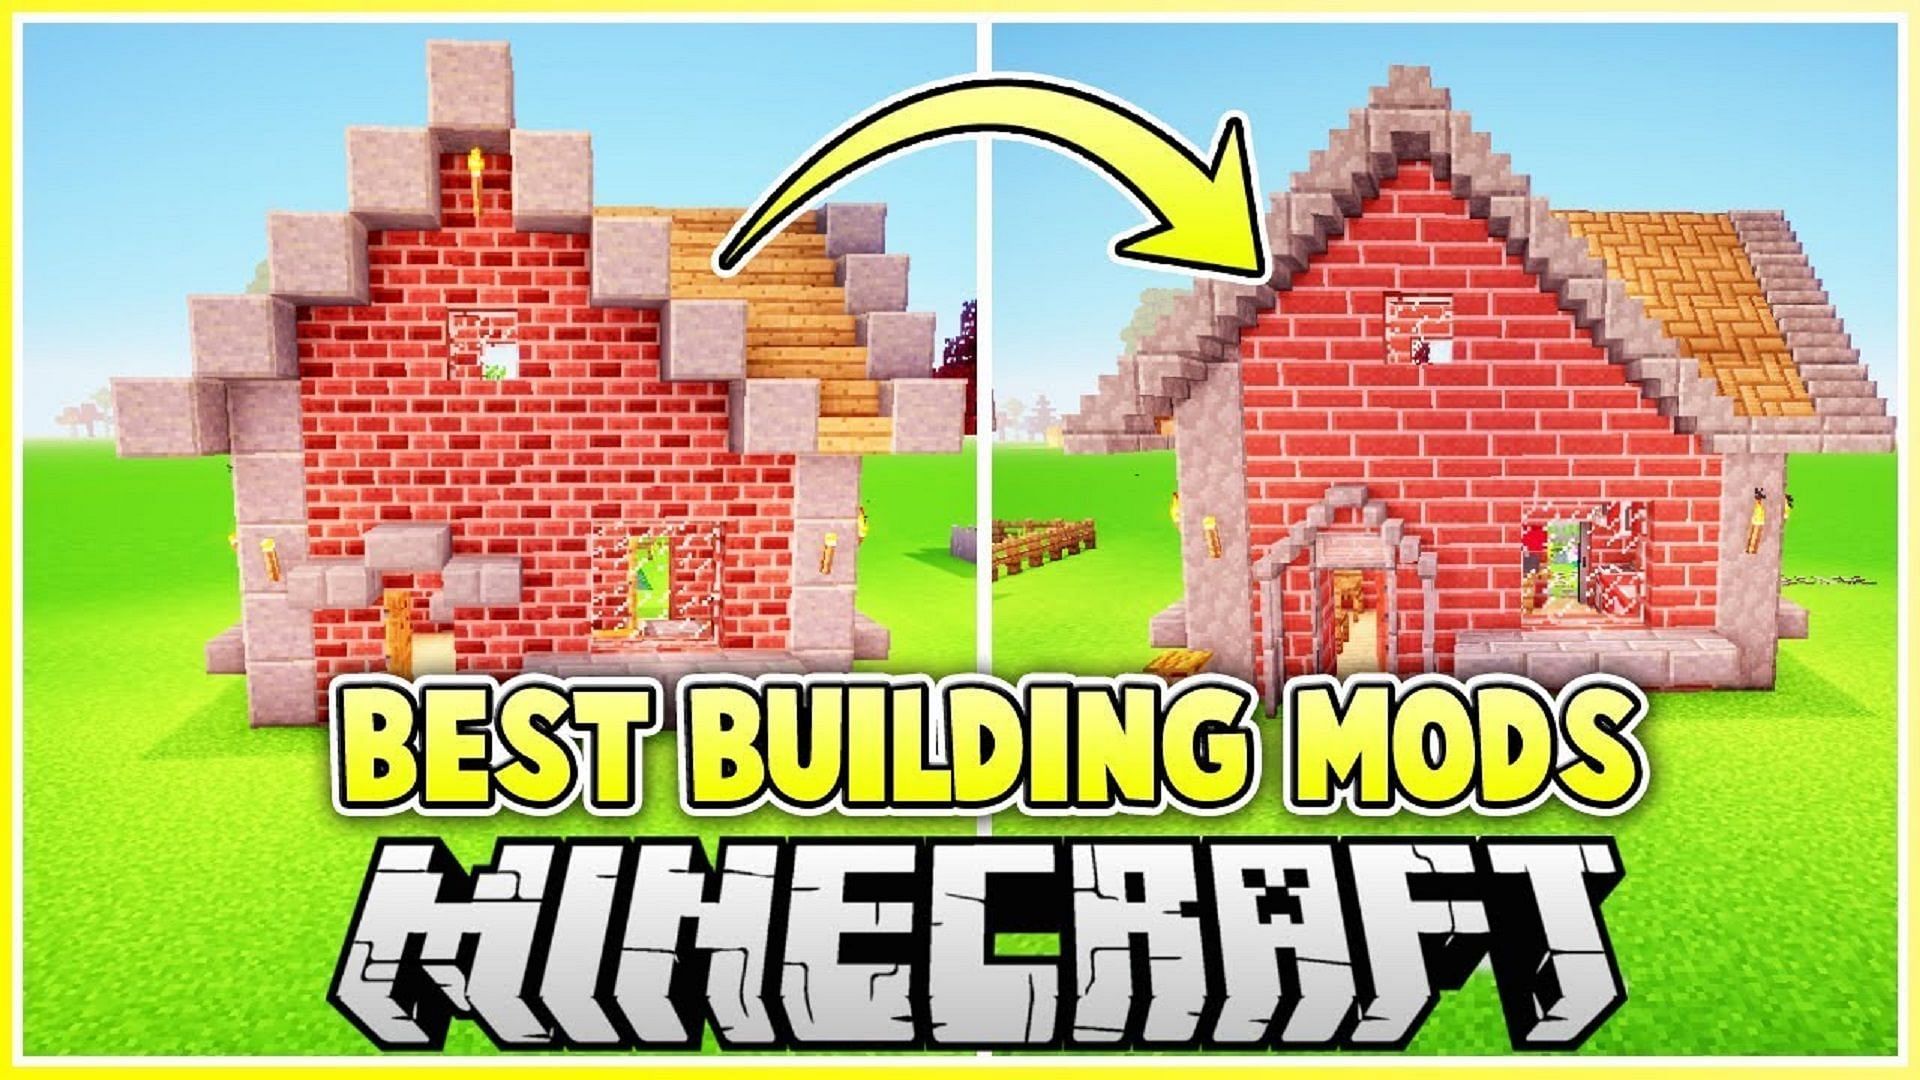 3 ways to make offensive towers in Minecraft 1.19 update